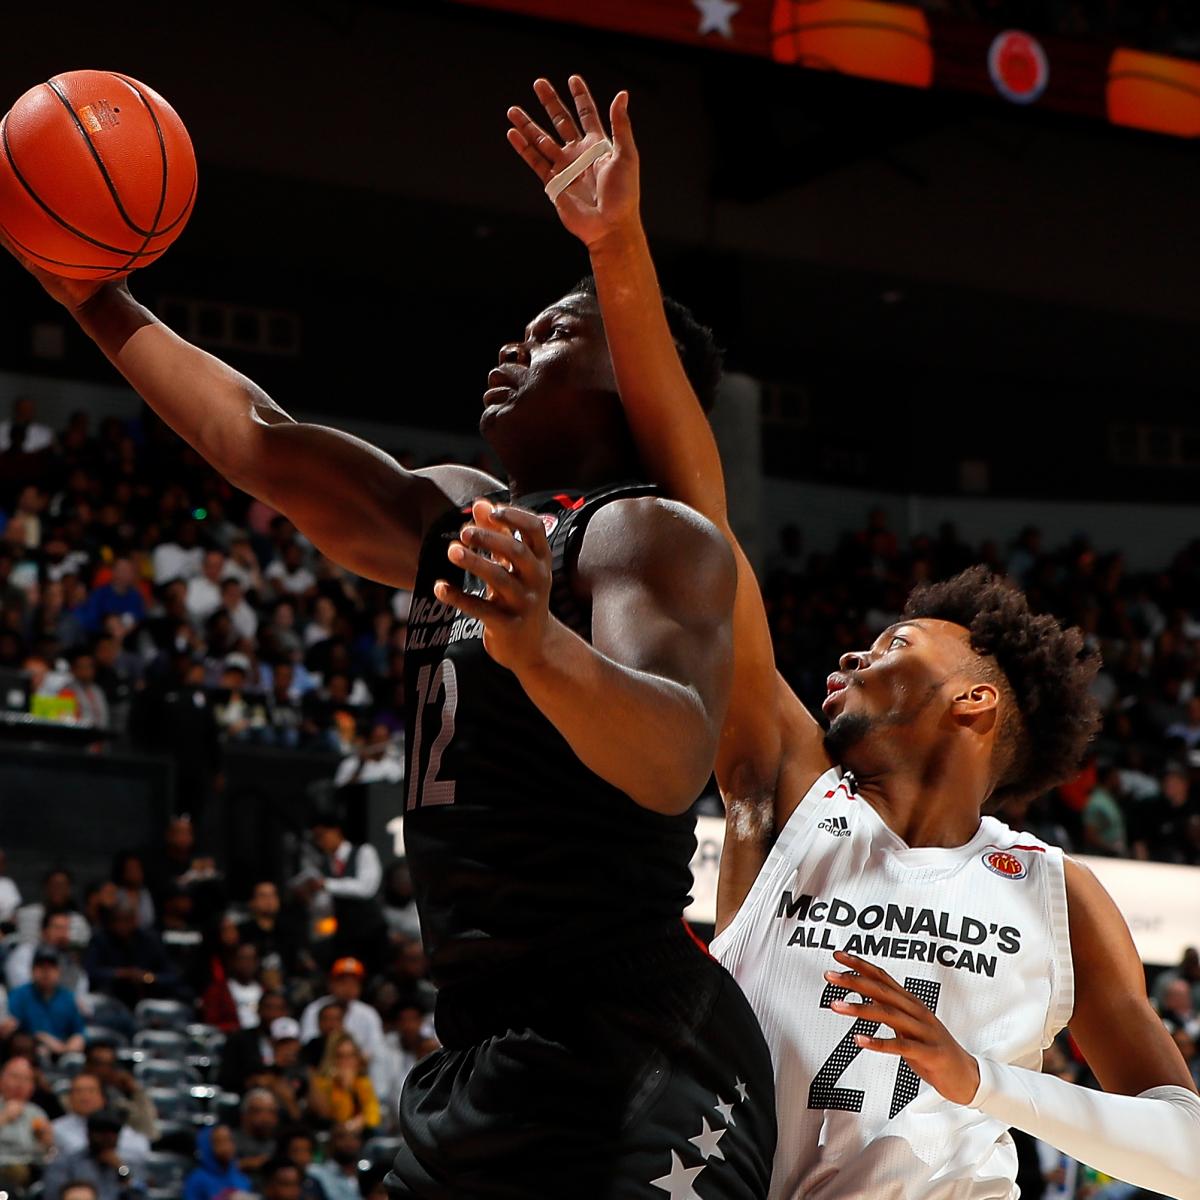 Zion Williamson drops jaws, wins dunk contest ahead of McDonald's  All-American game